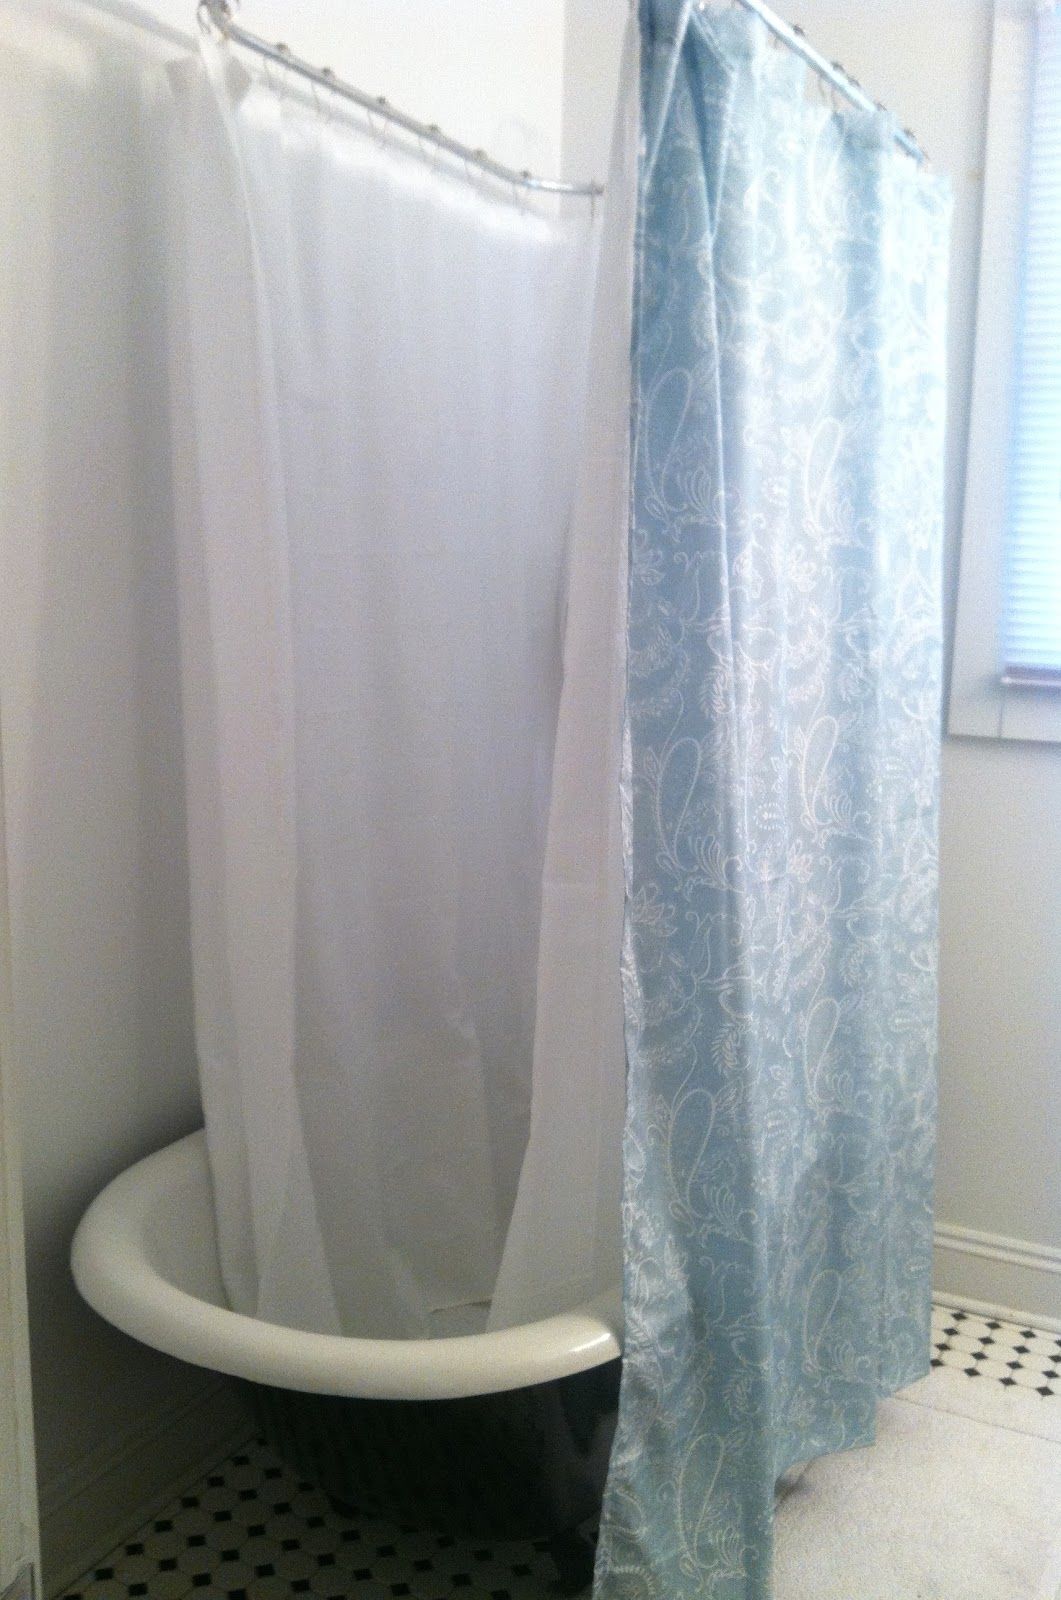 Clawfoot Tub Wall Mounted Shower Curtain Rod Add A Shower Throughout Shower Curtains For Clawfoot Tubs (View 10 of 25)